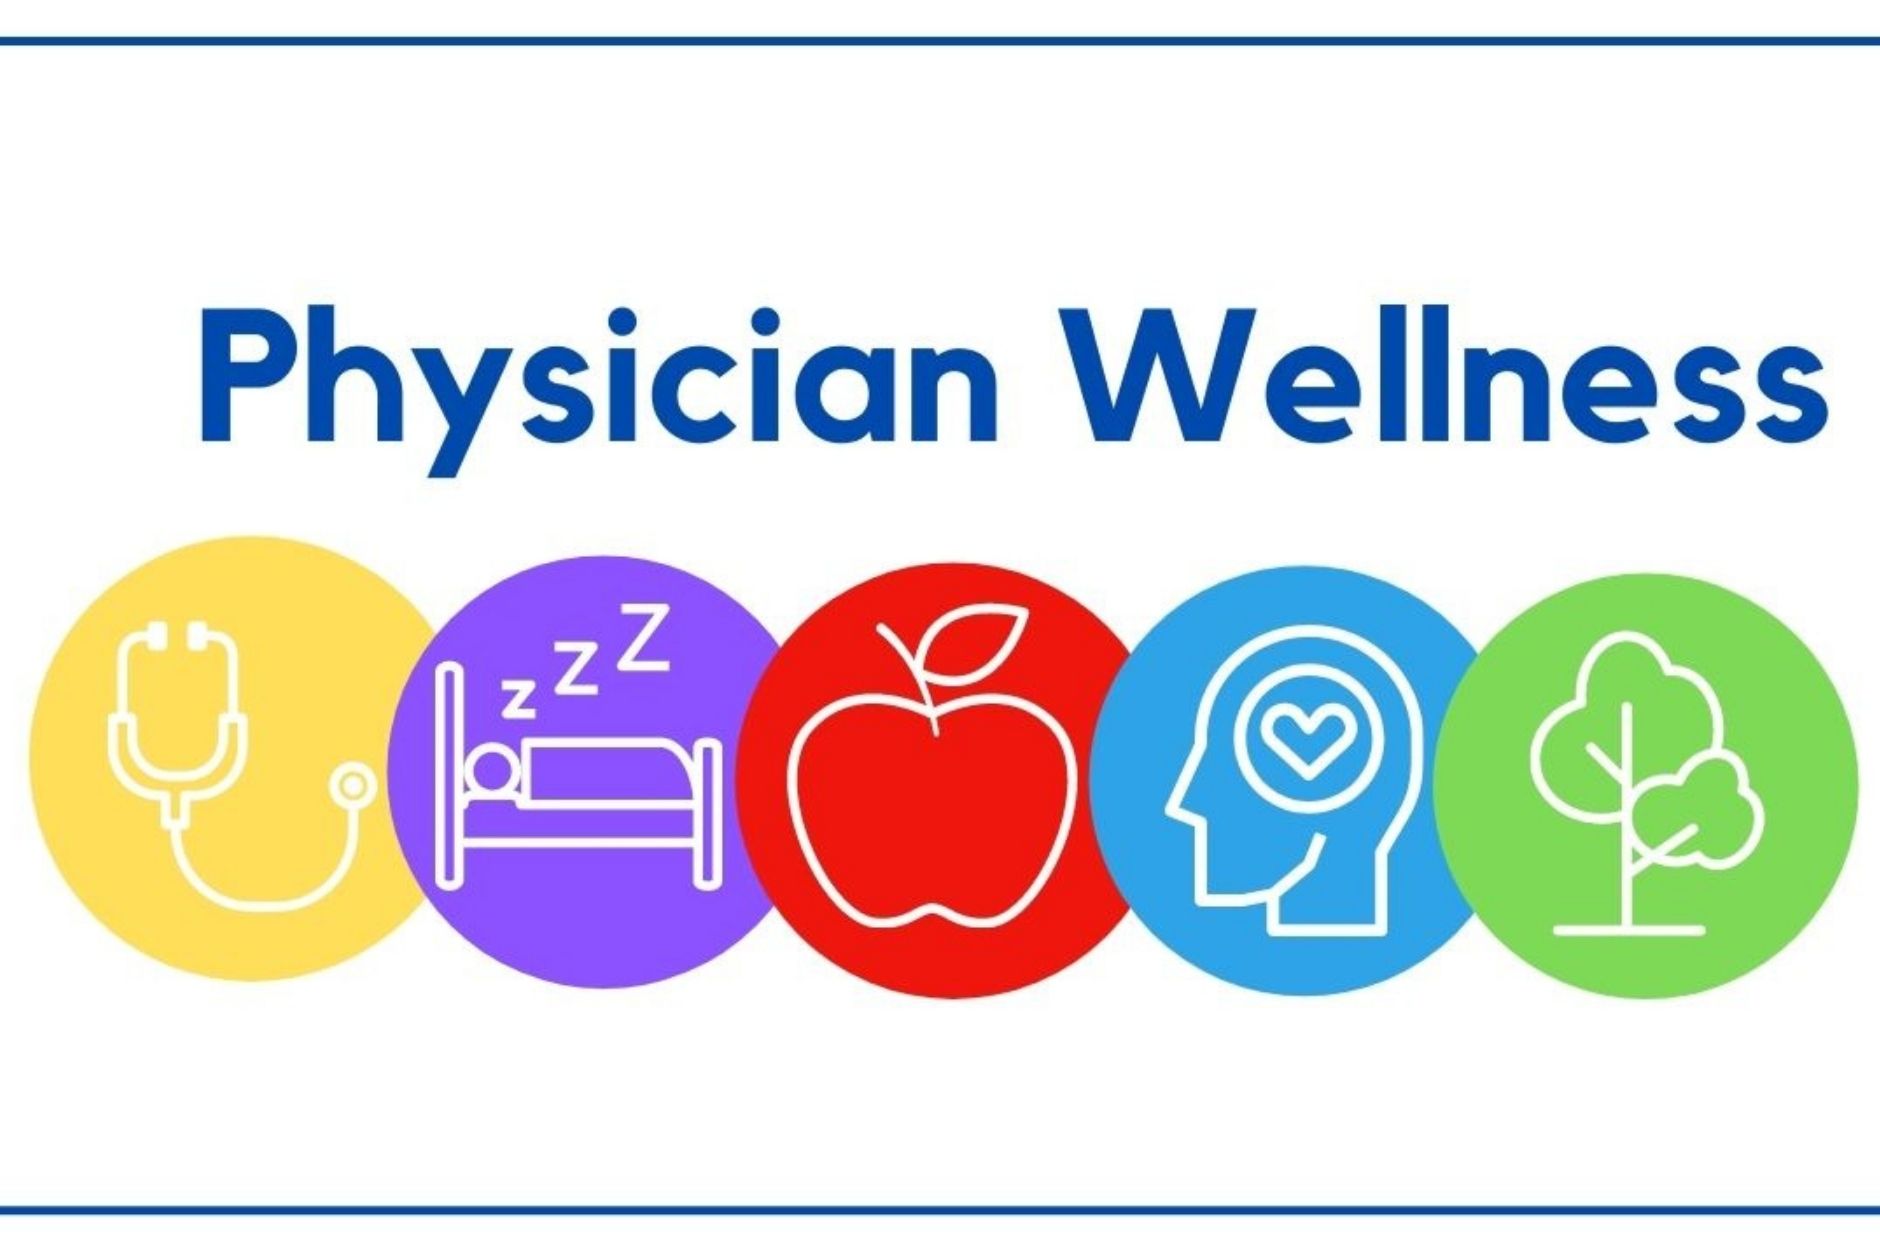 text "physician wellness" with images of a stethoscope, bed, apple, brain and tree